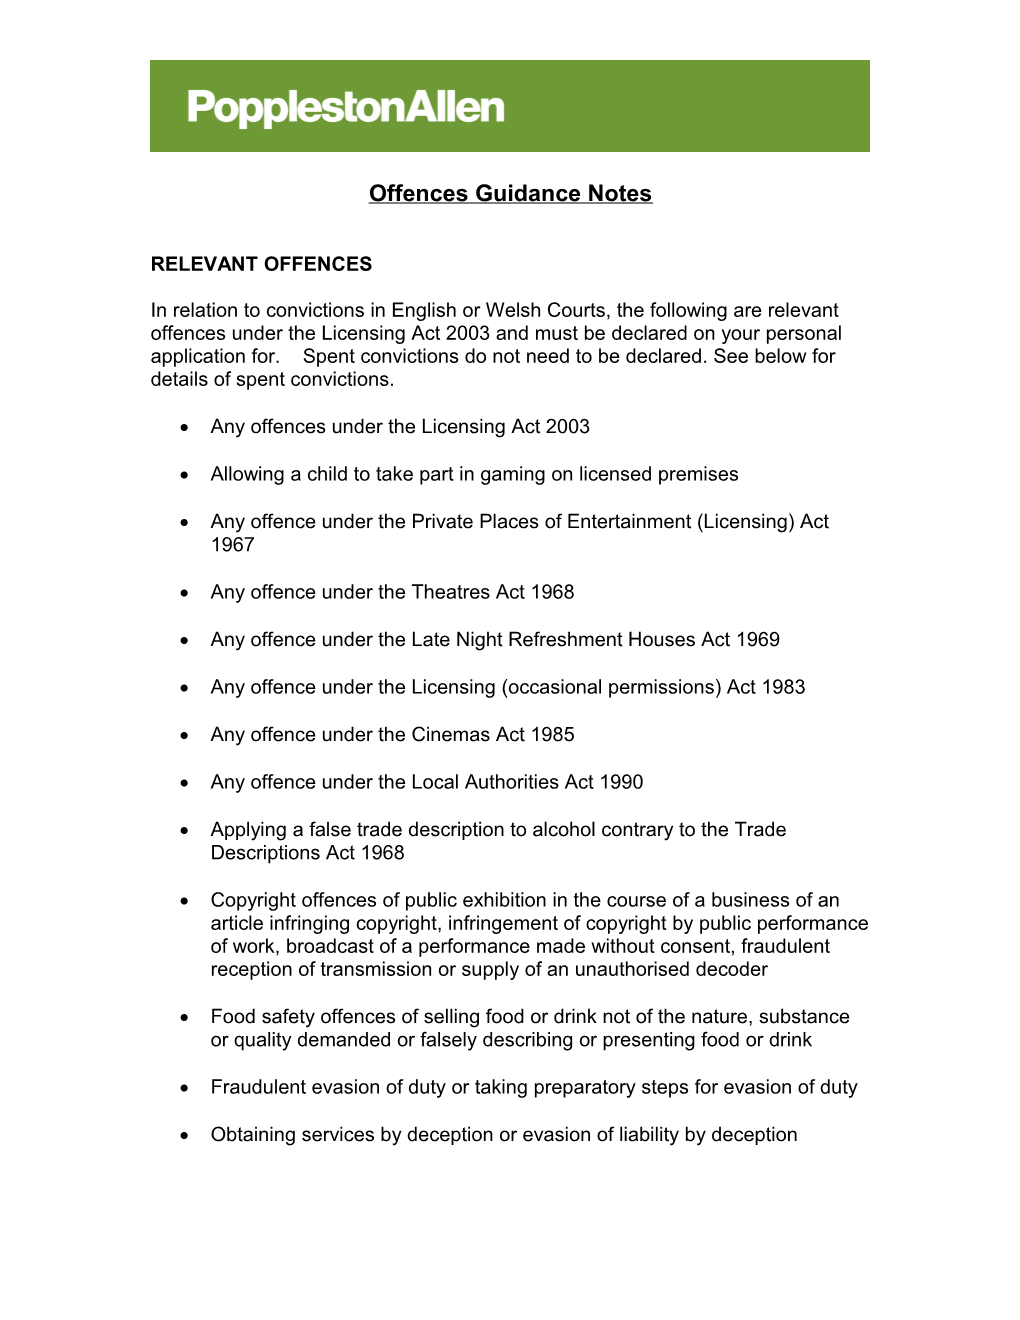 Premises Licence Guidance Notes